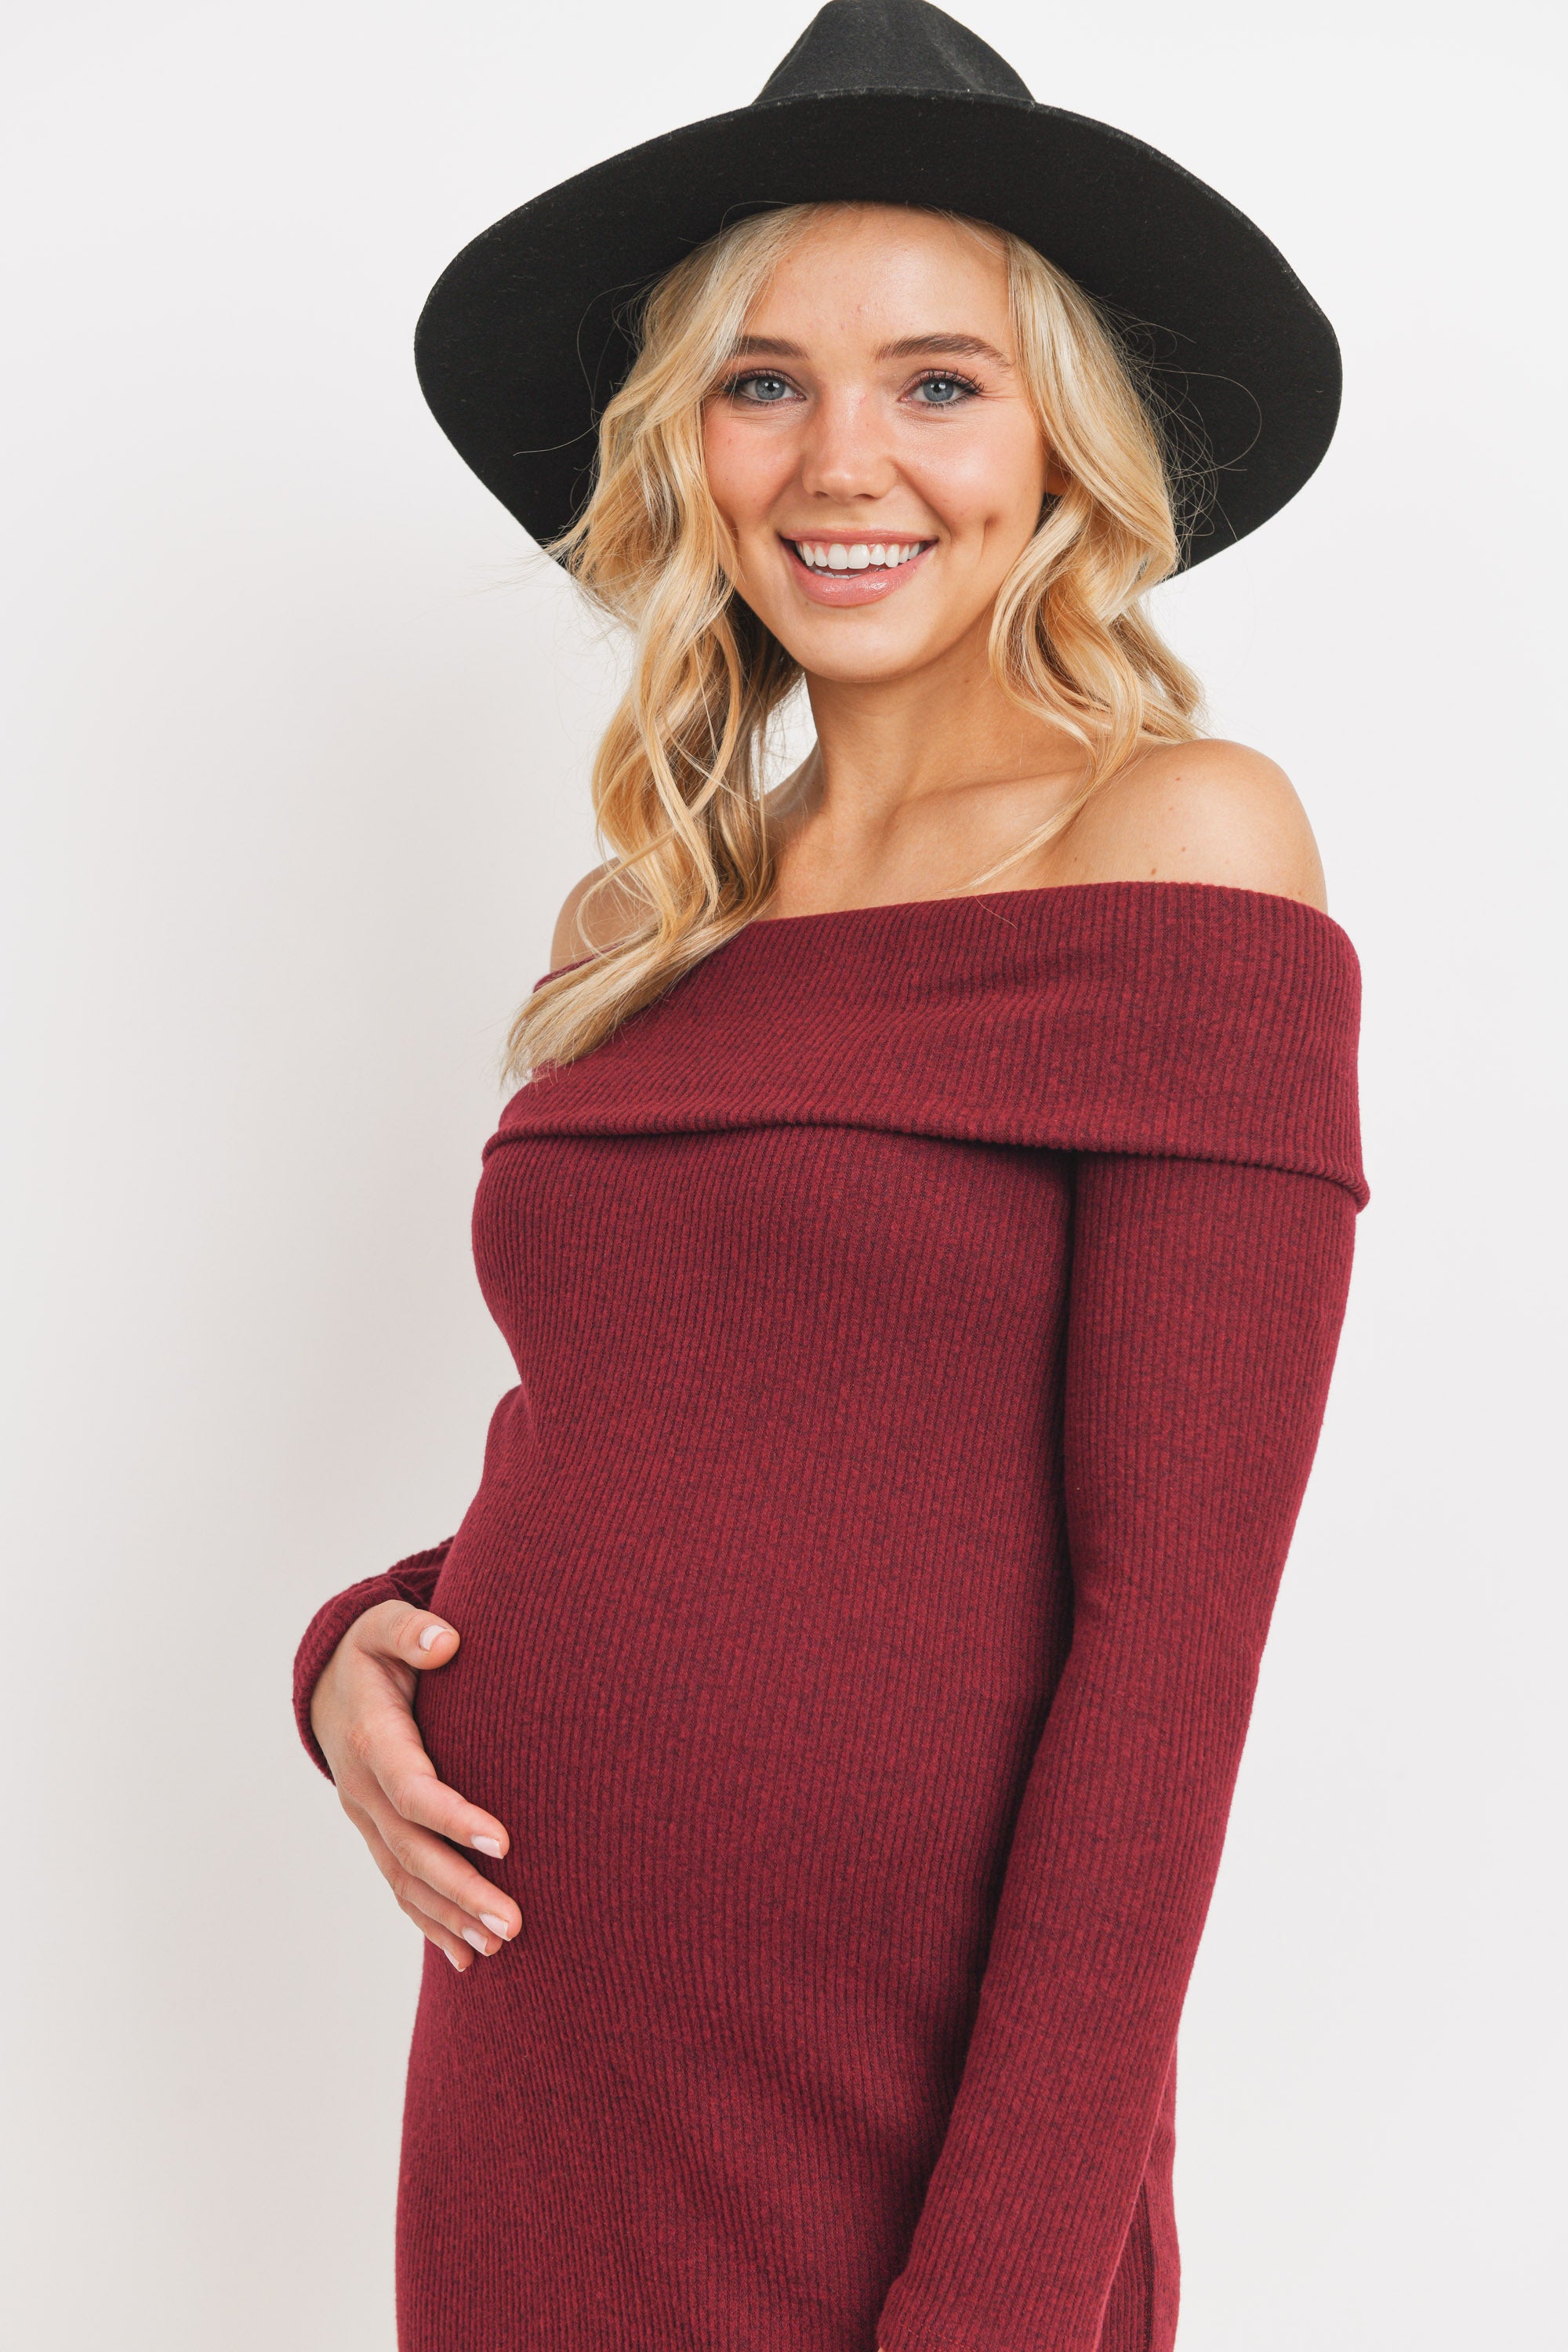 Cashmere Like Ribbed Off-Shoulder Maternity Dress in burgundy front view close up